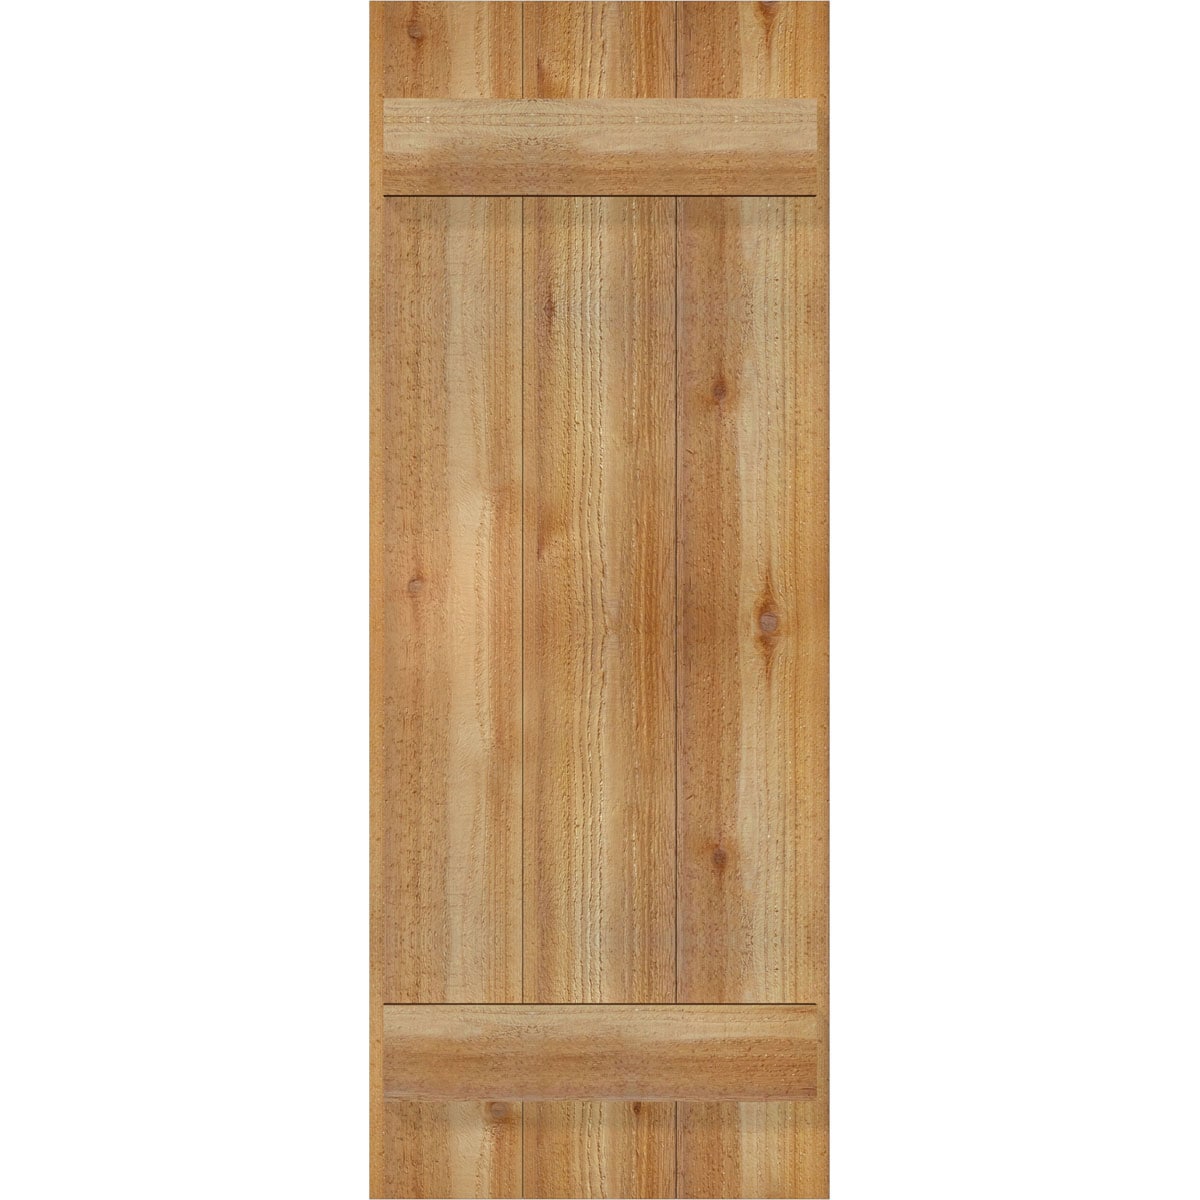 Ekena Millwork 2-Pack 16.125-in W x 42-in H Unfinished Board and Batten Wood Western Red cedar Exterior Shutters